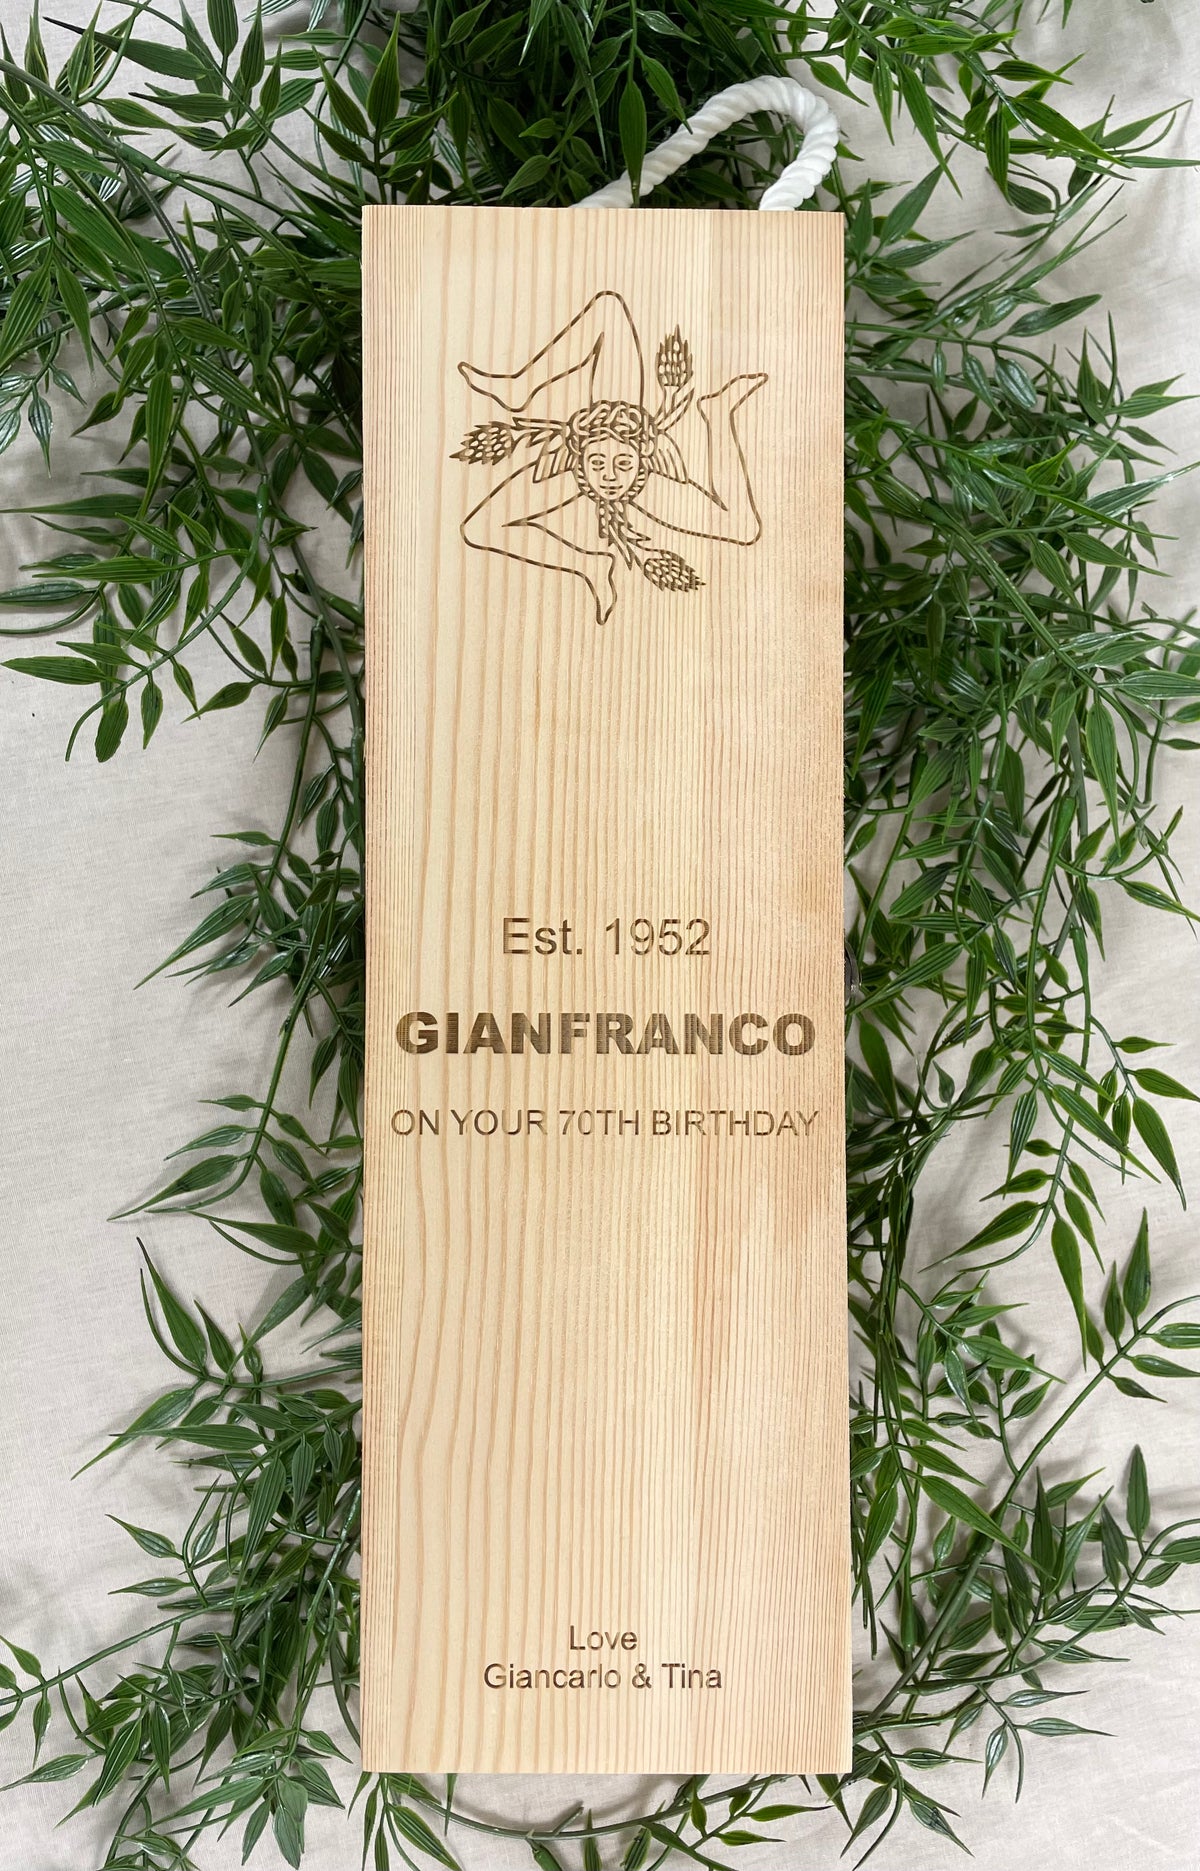 personalised wooden wine box